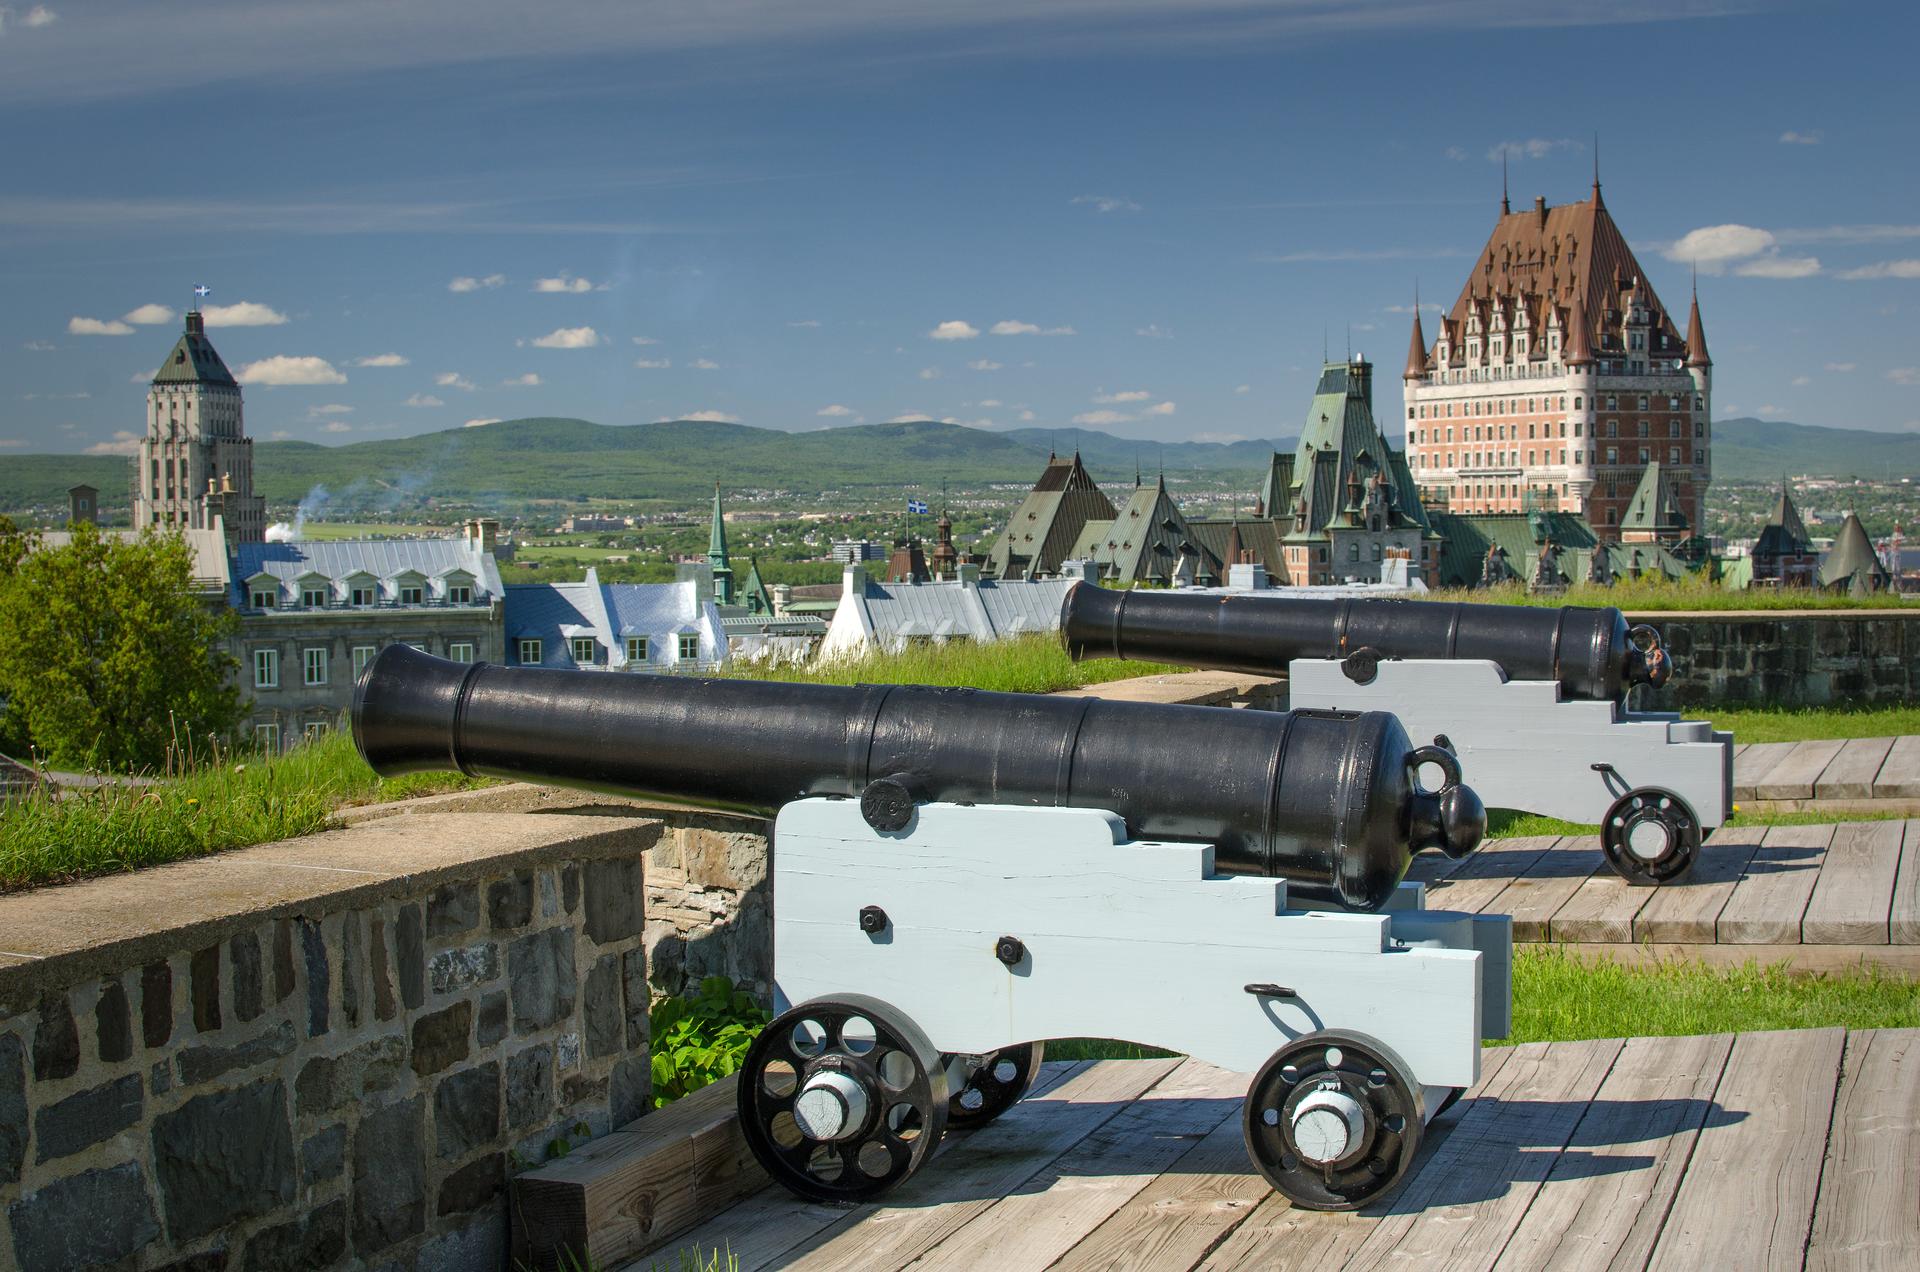 View of the Château Frontenac from the Québec Citadel, Québec City